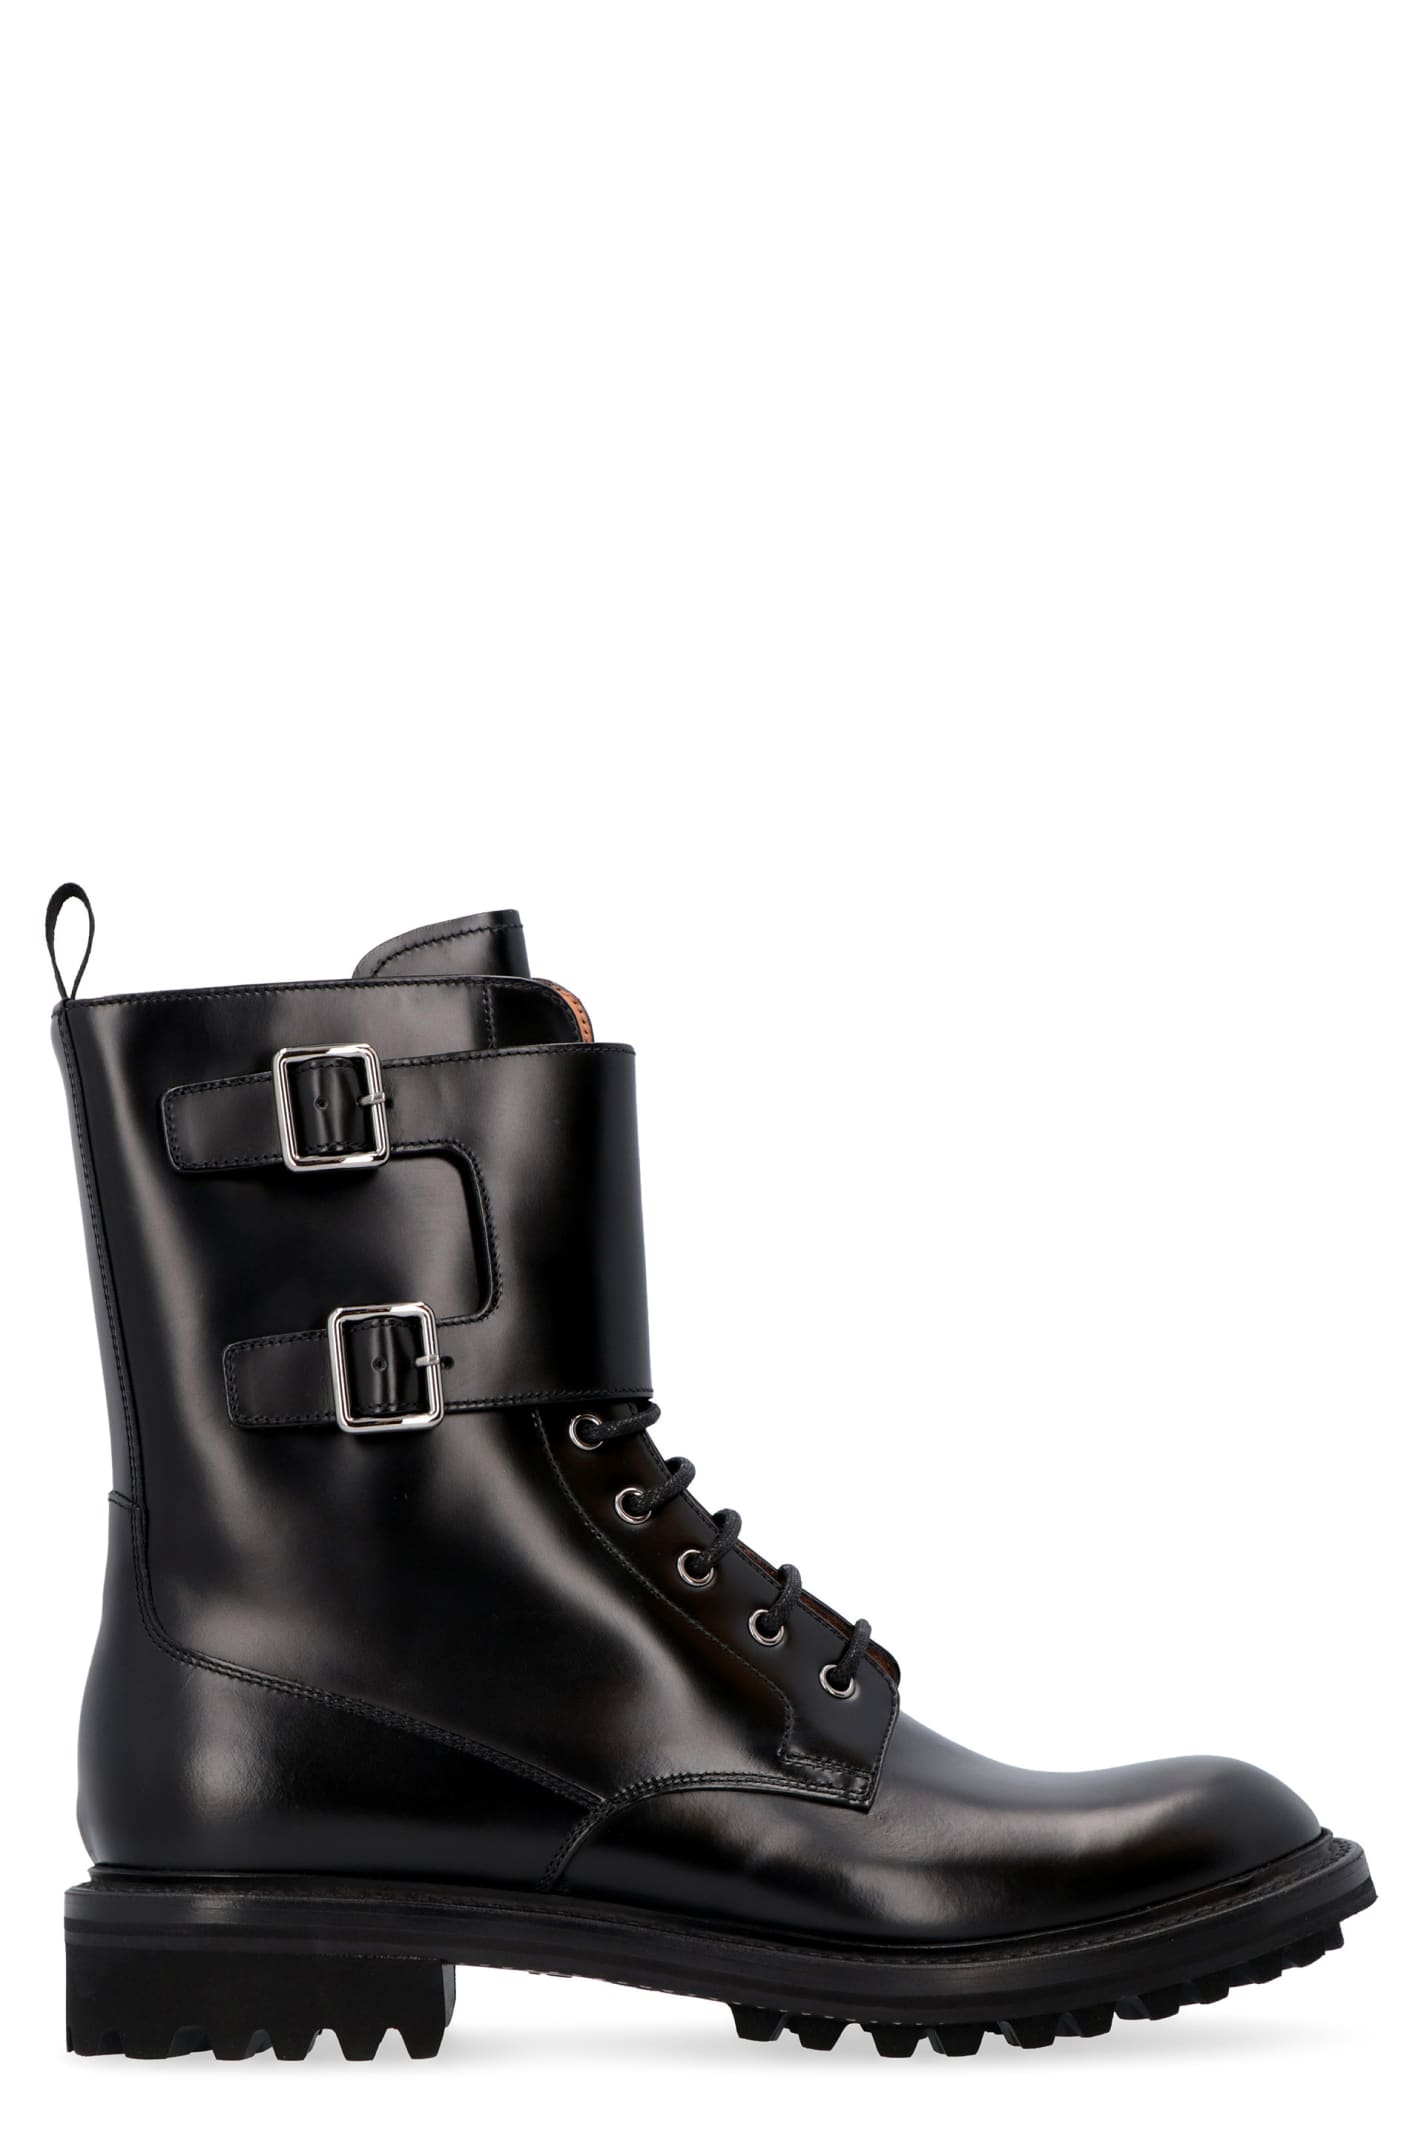 Churchs Carly Lw Lace-up Ankle Boots